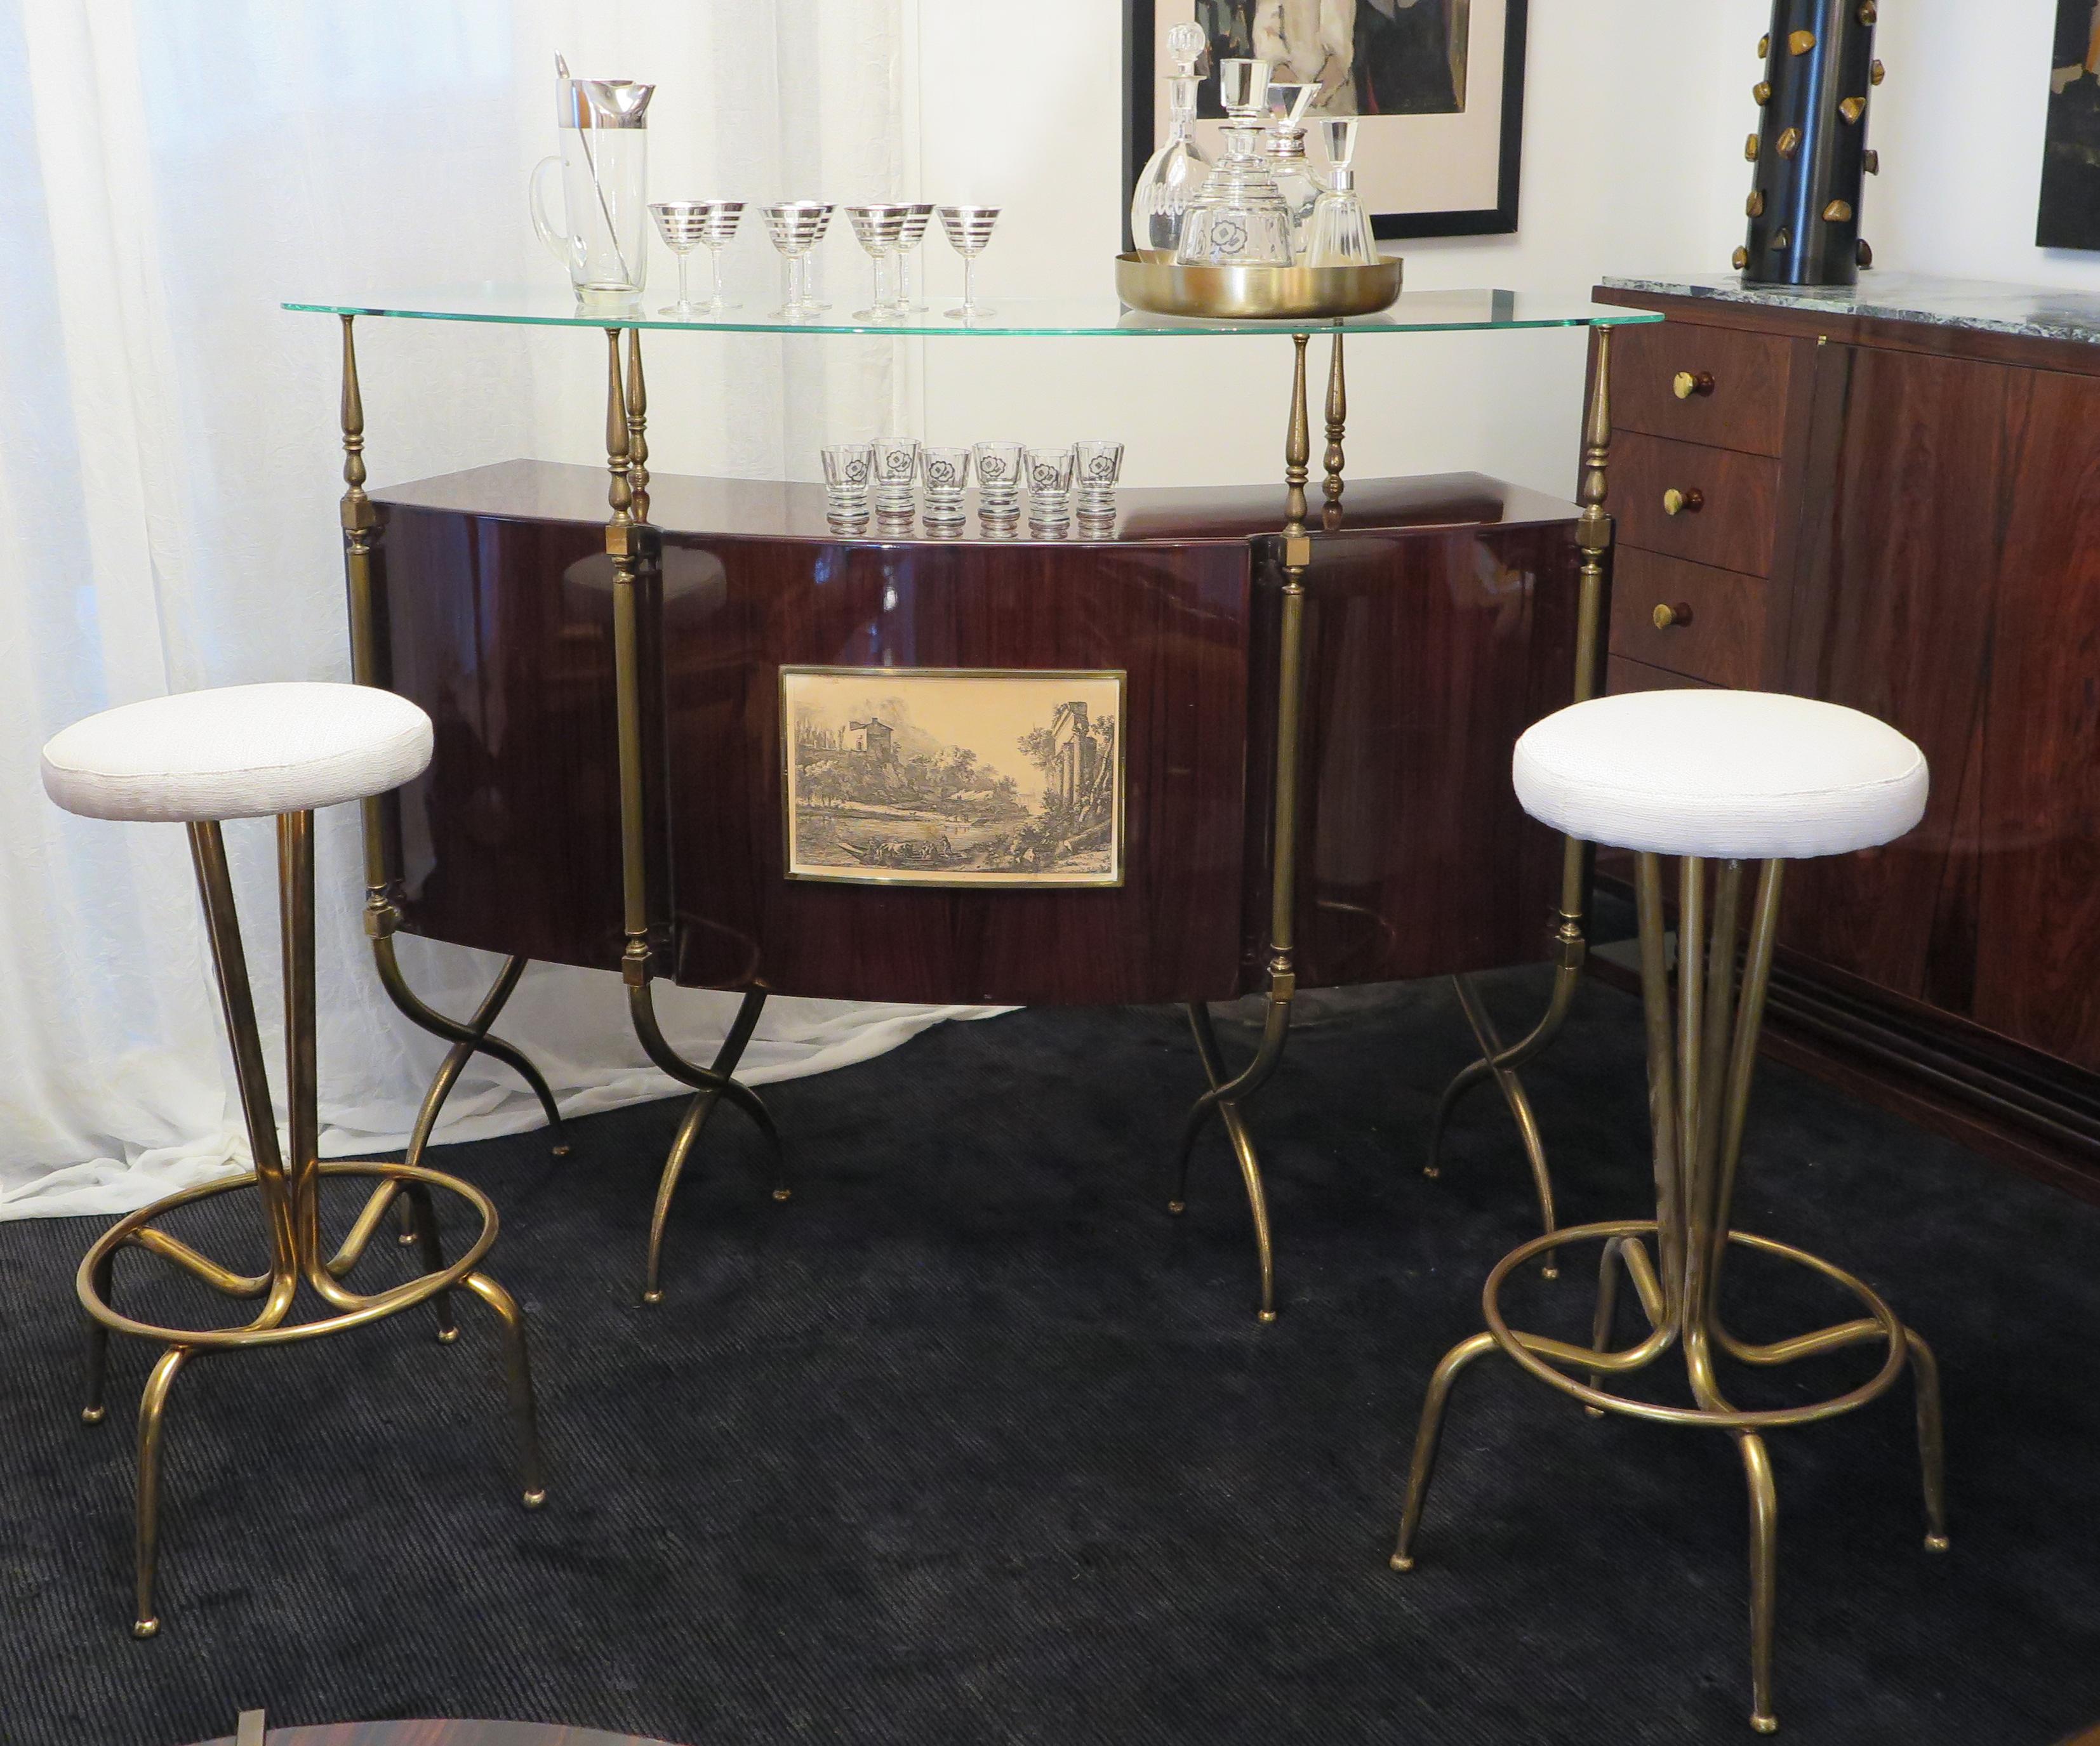 This unique curved Italian Mid-Century bar is crafted in Rosewood with a gloss finish in the style of Gio Ponti.  Stylized brass elements hold up glass top and run down the facade turning into the legs of the piece. The glass top adds lightness and